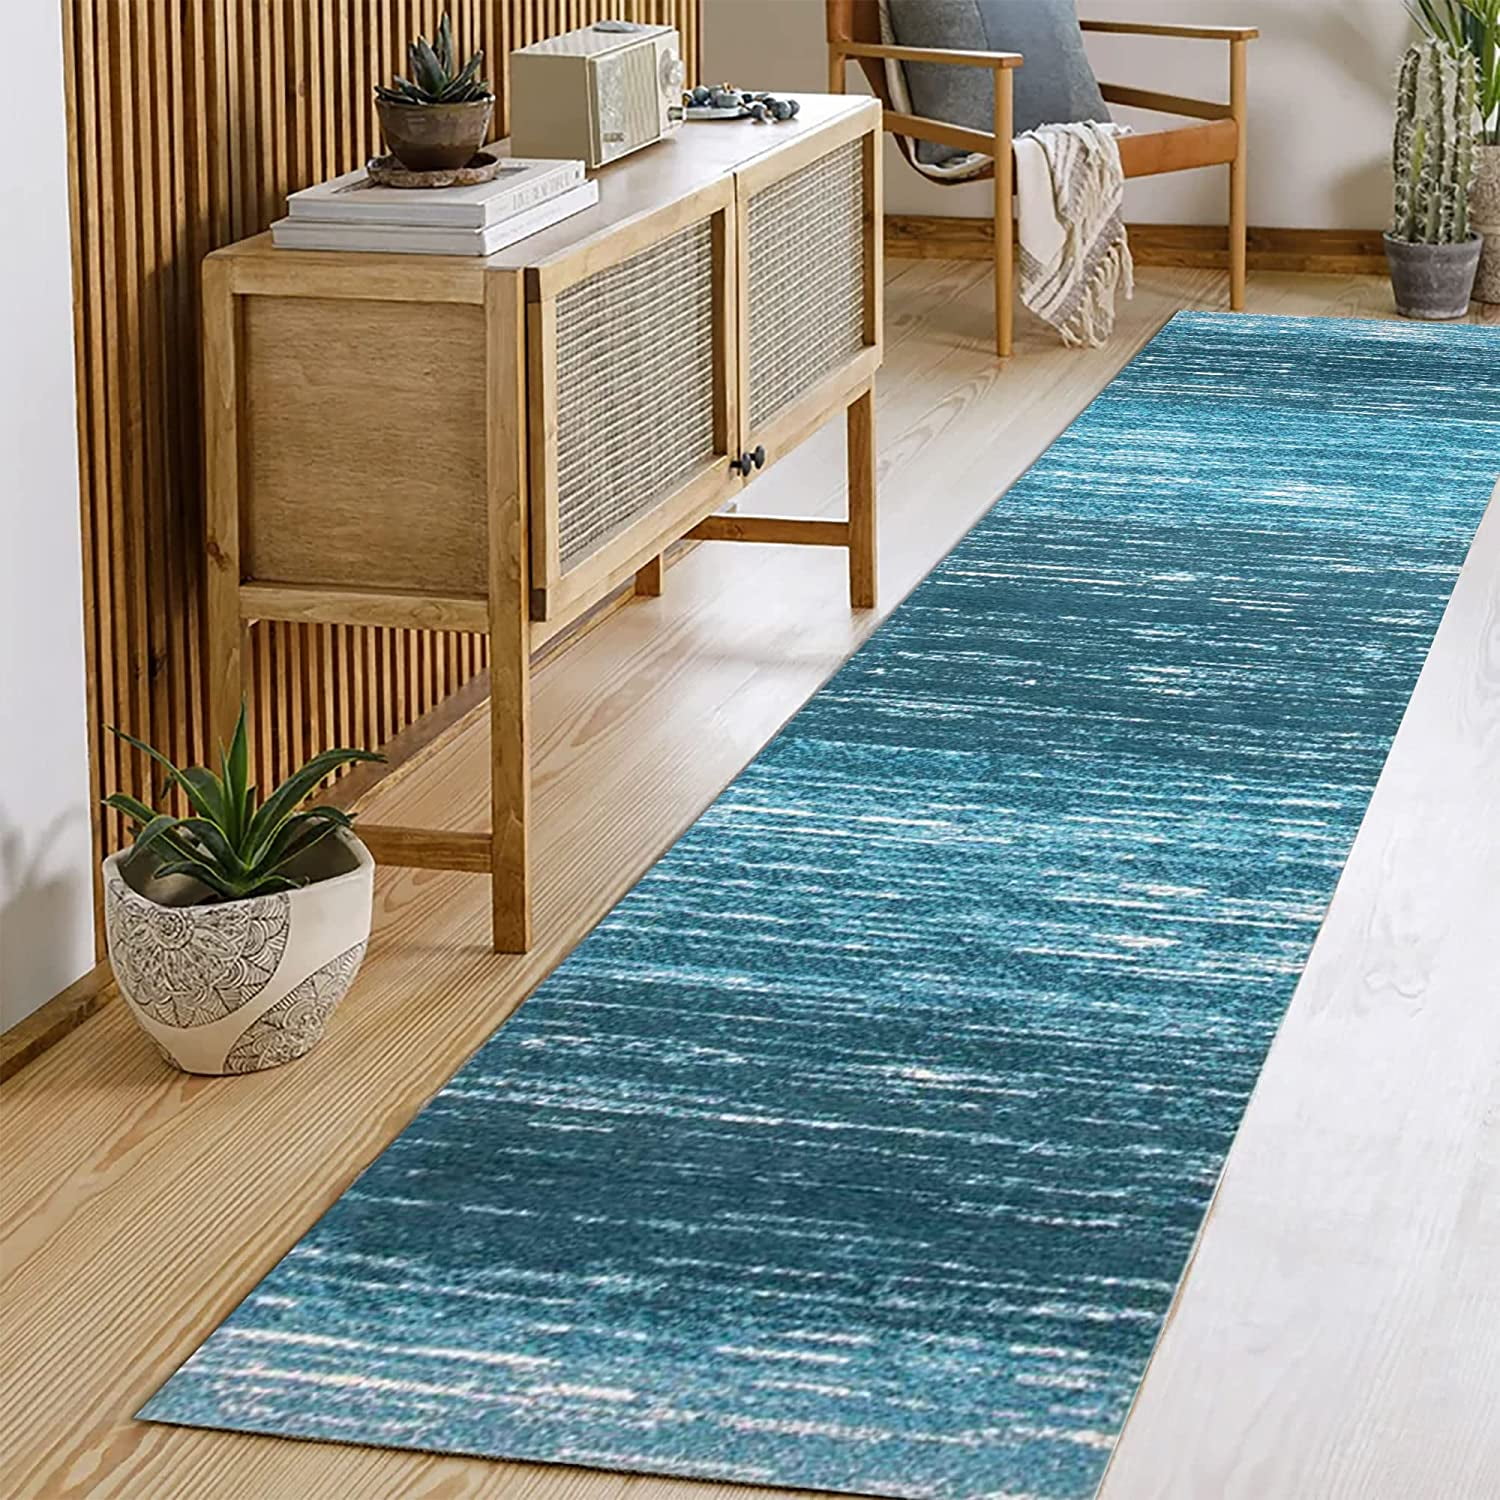 Hallway Runner Rug Mat Low Profile Ultra-Thin for Summer Using, Machine  Washable Throw Rugs, Extra Large Area Rug Non Slip Rug Runner Carpet, Easy